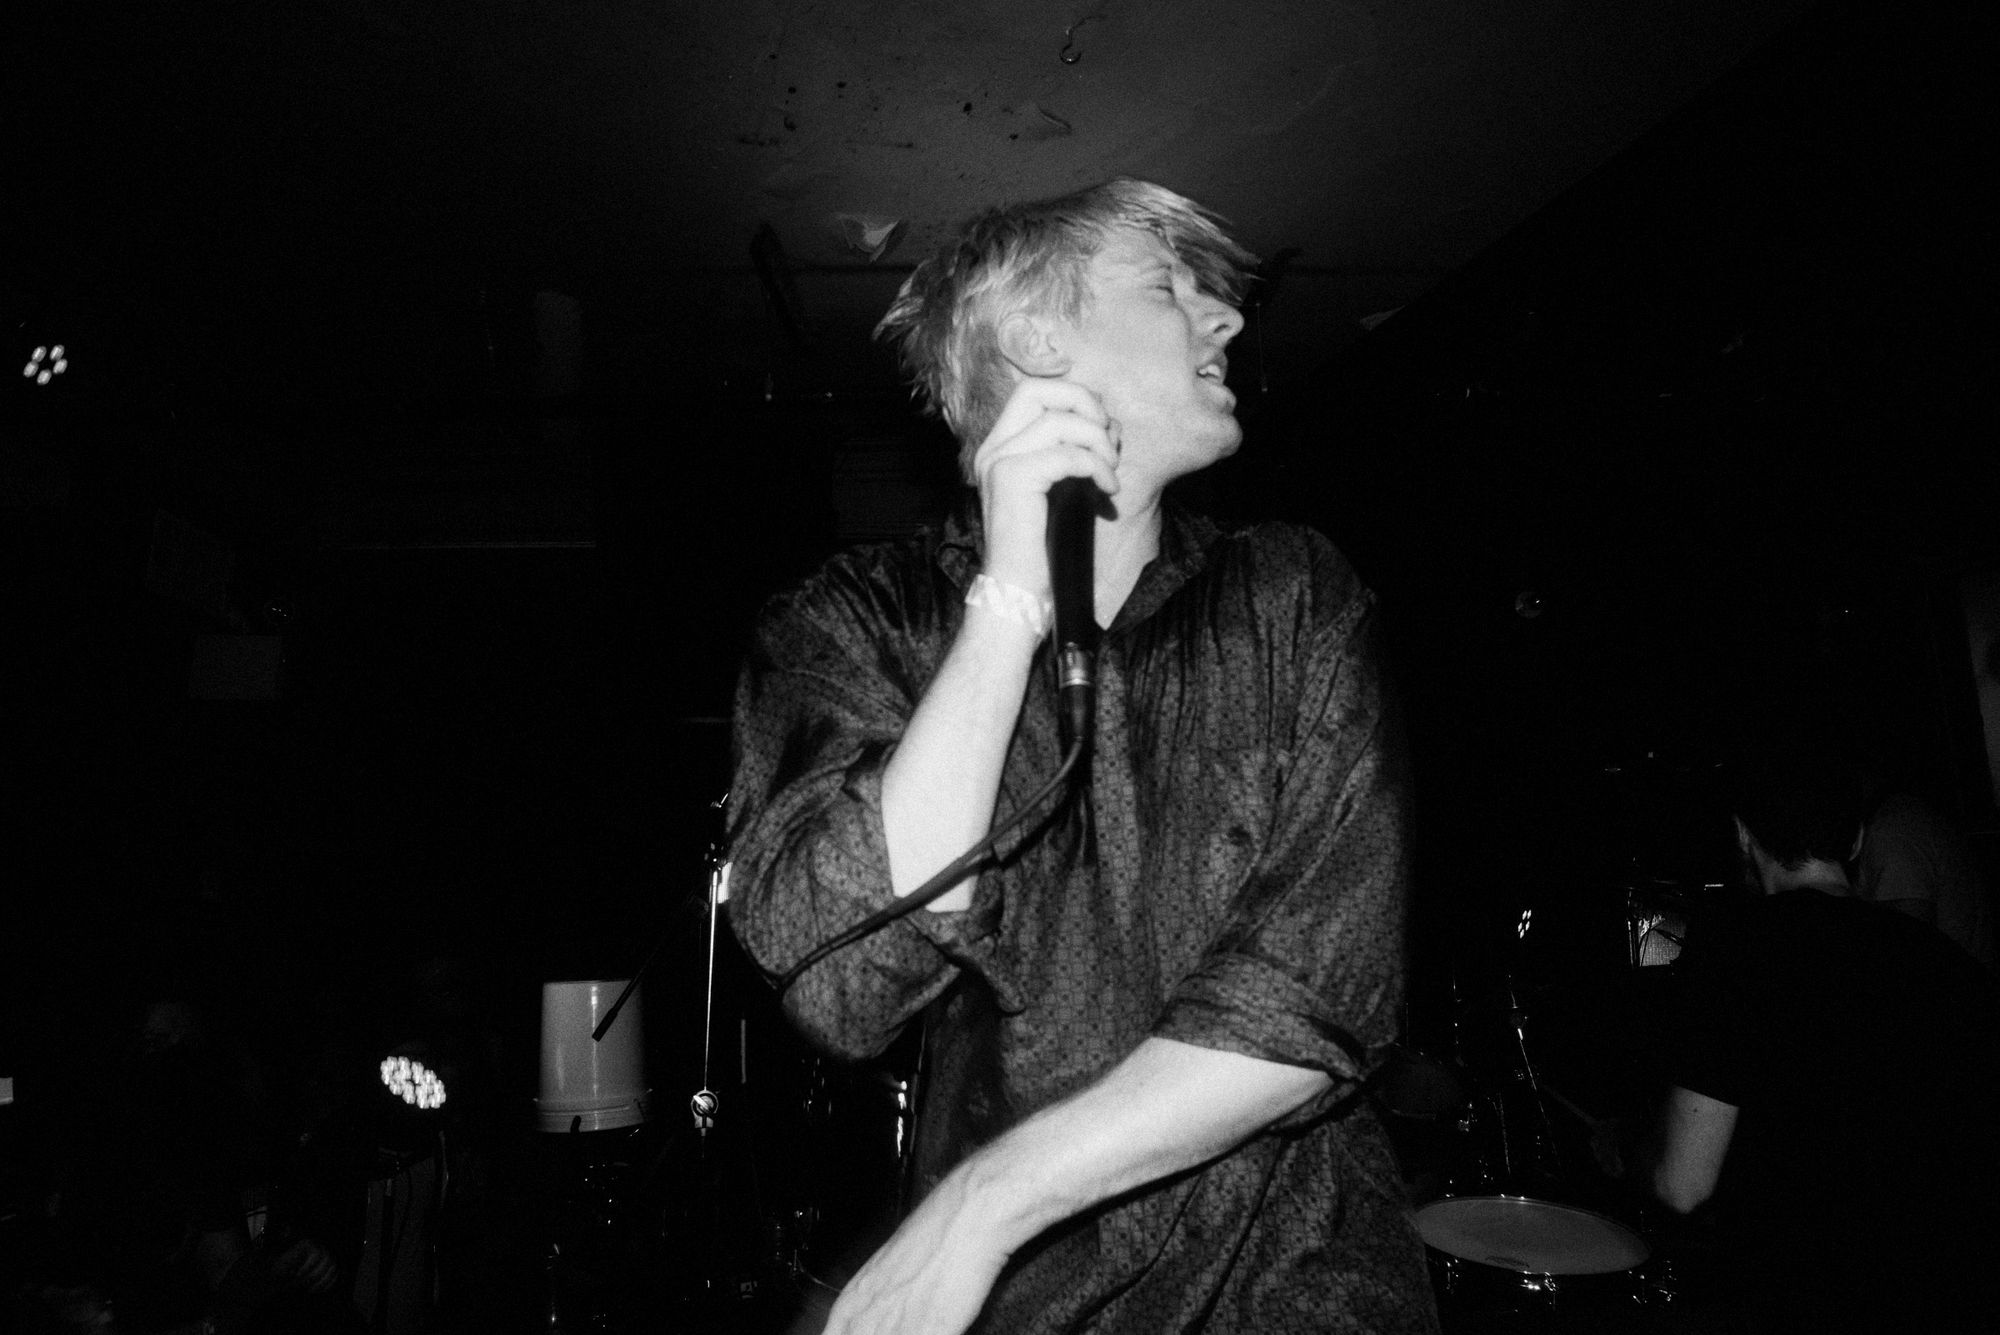 A black and white image of a man with bleached hair, clutching a microphone and shaking his head.